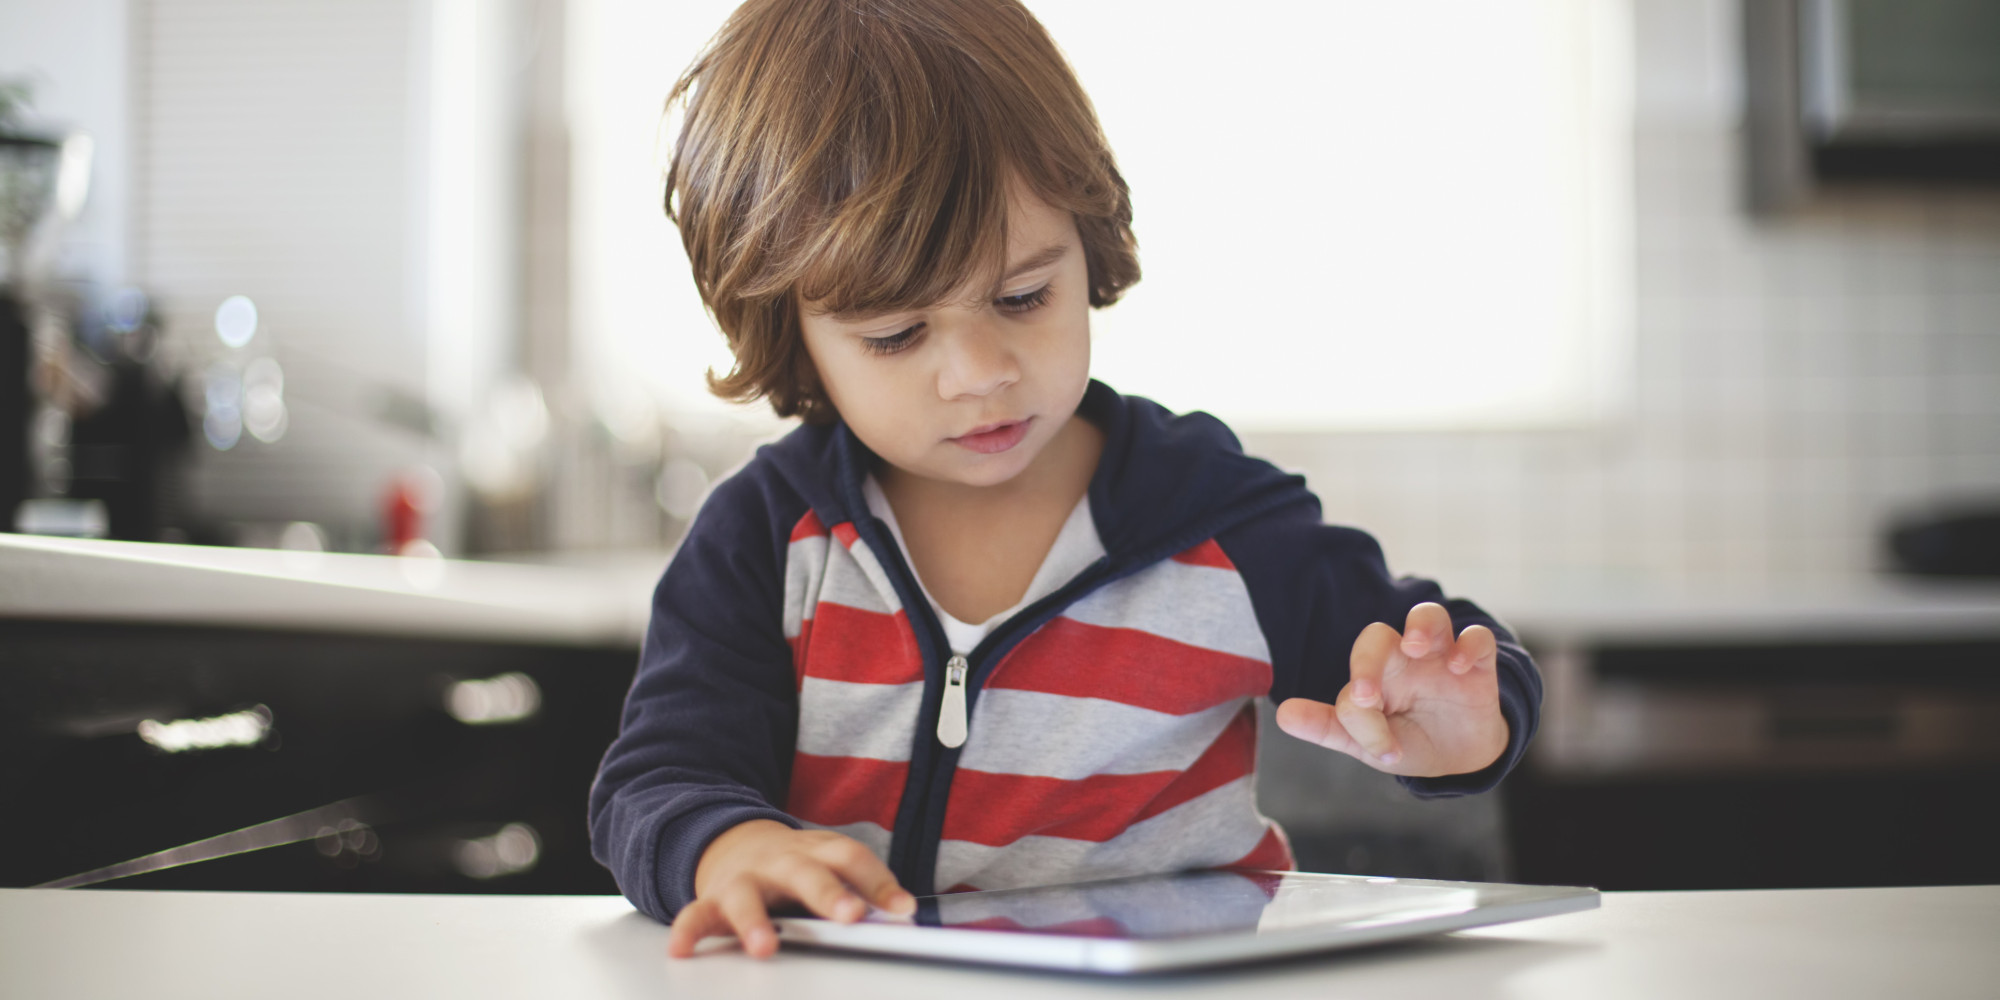 Kids' Screen Time May Affect Their Well-Being (STUDY ...